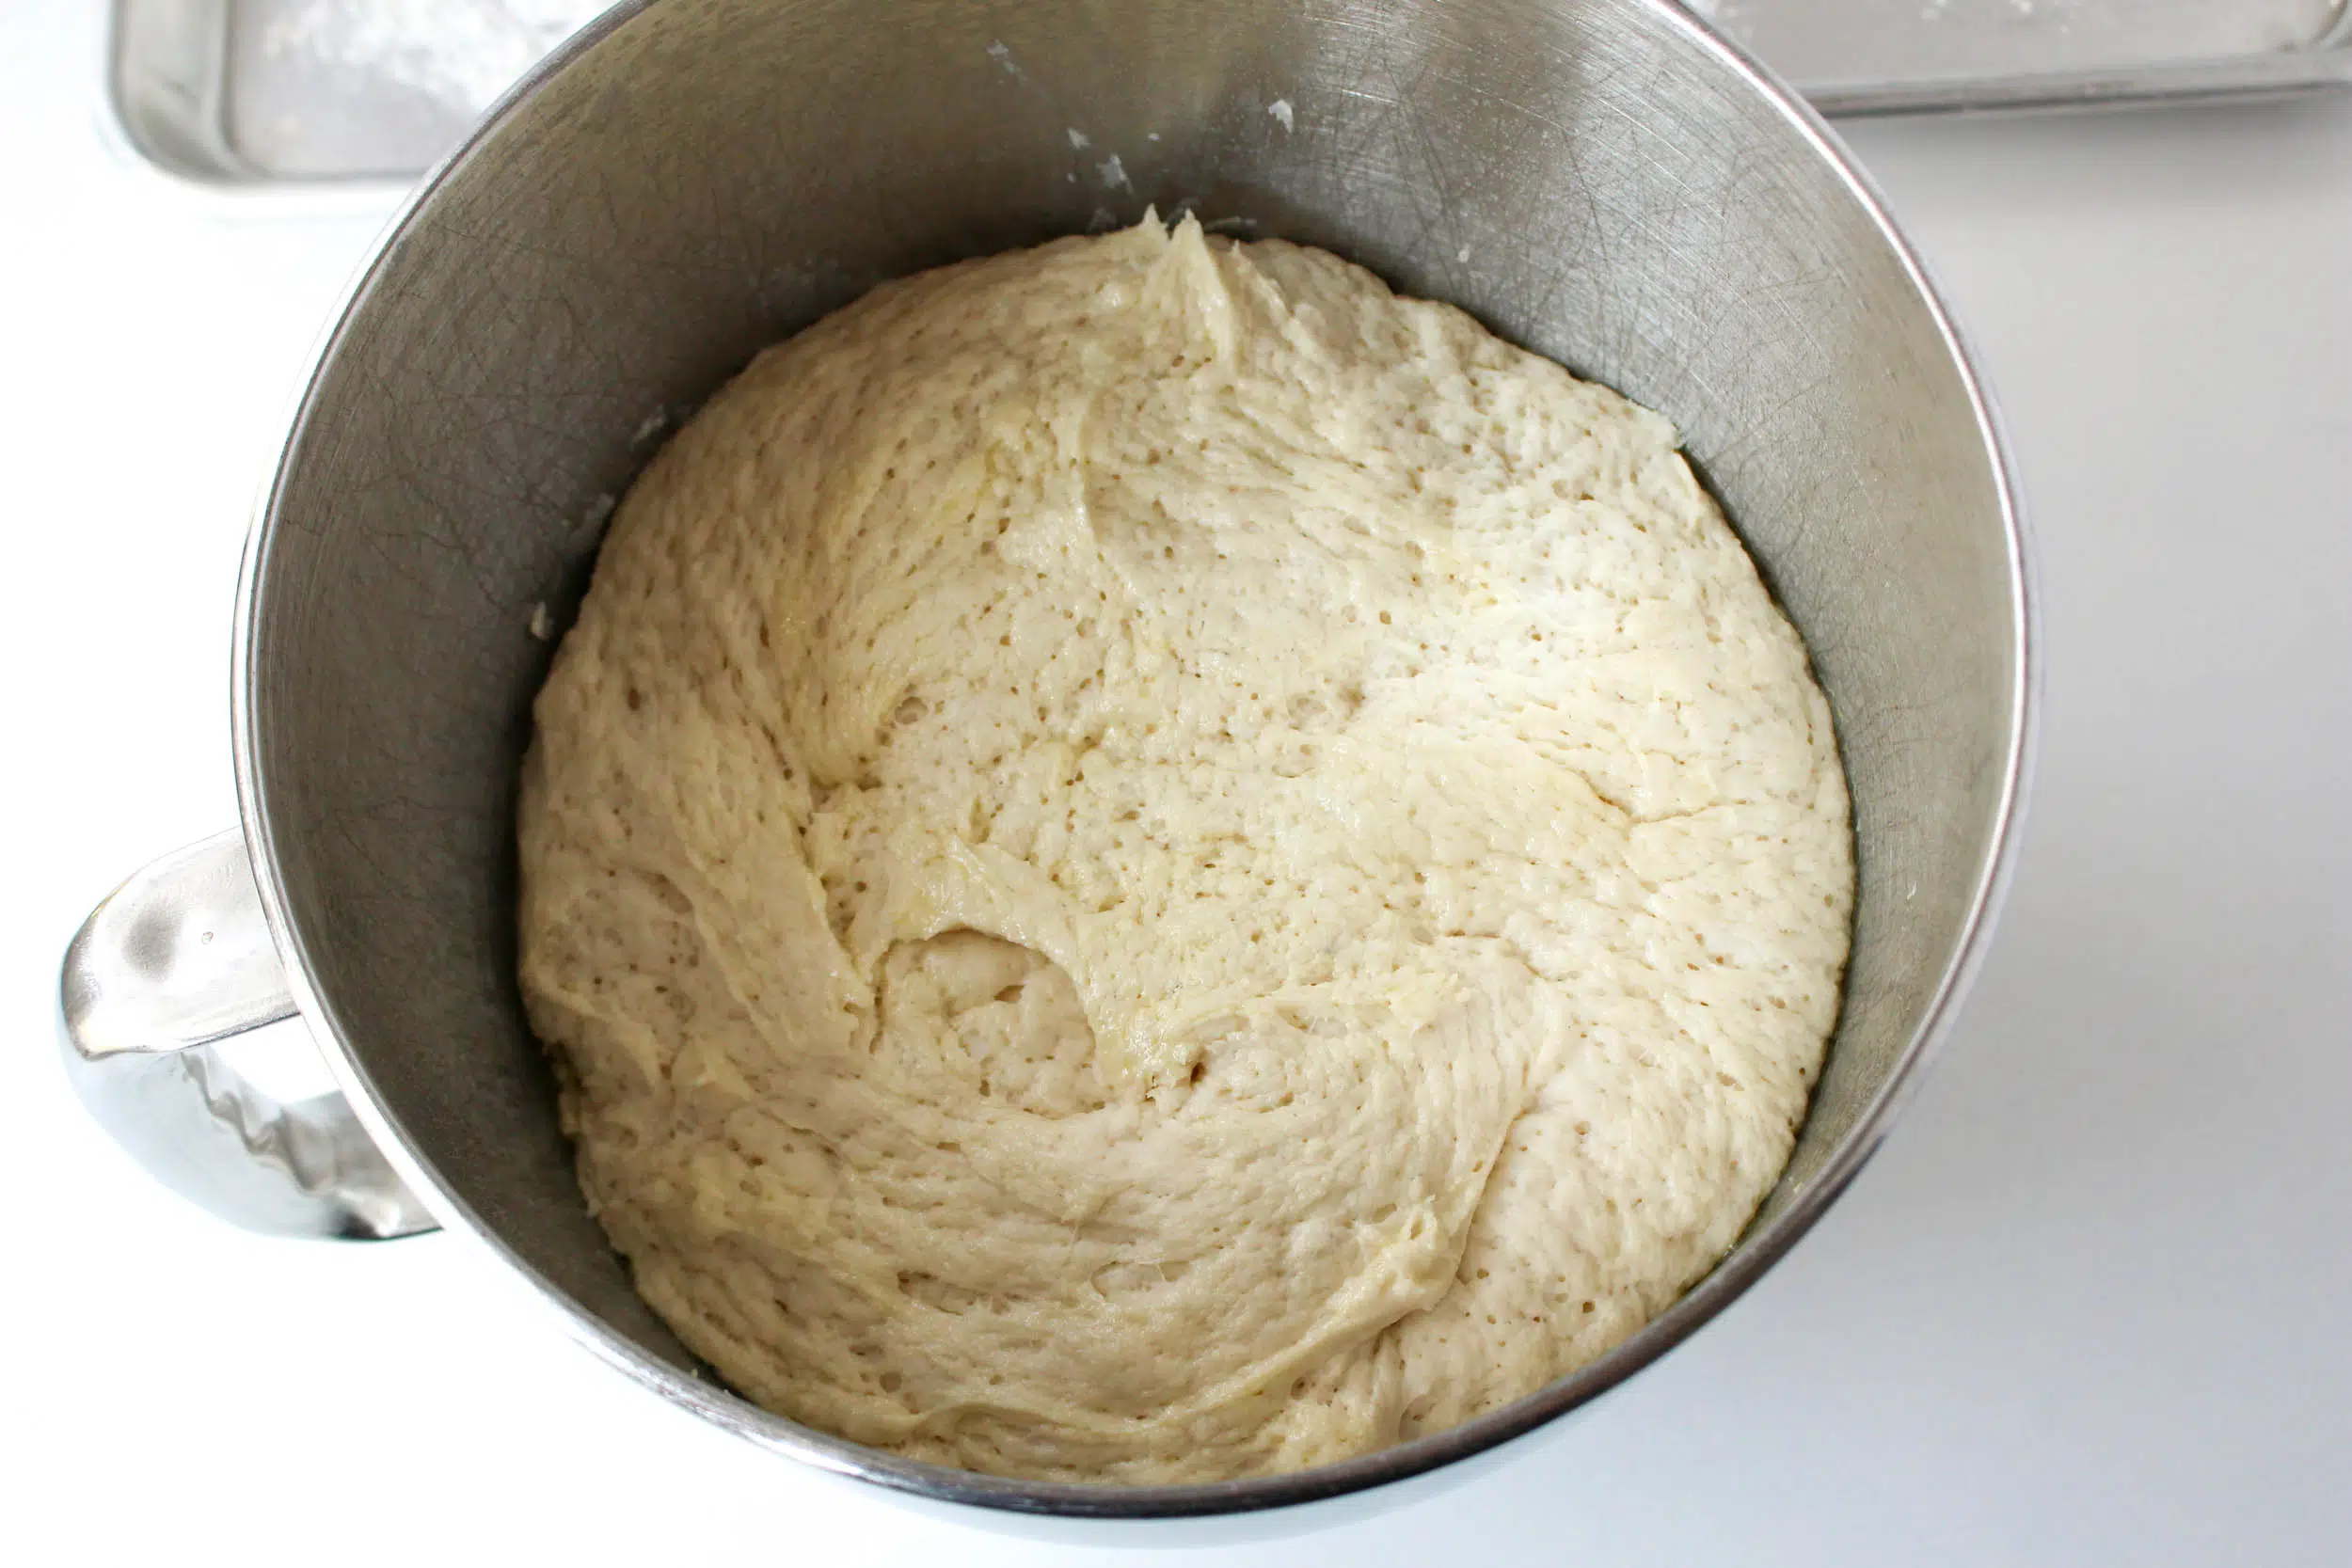 dough that has risen in stainless steel mixing bowl